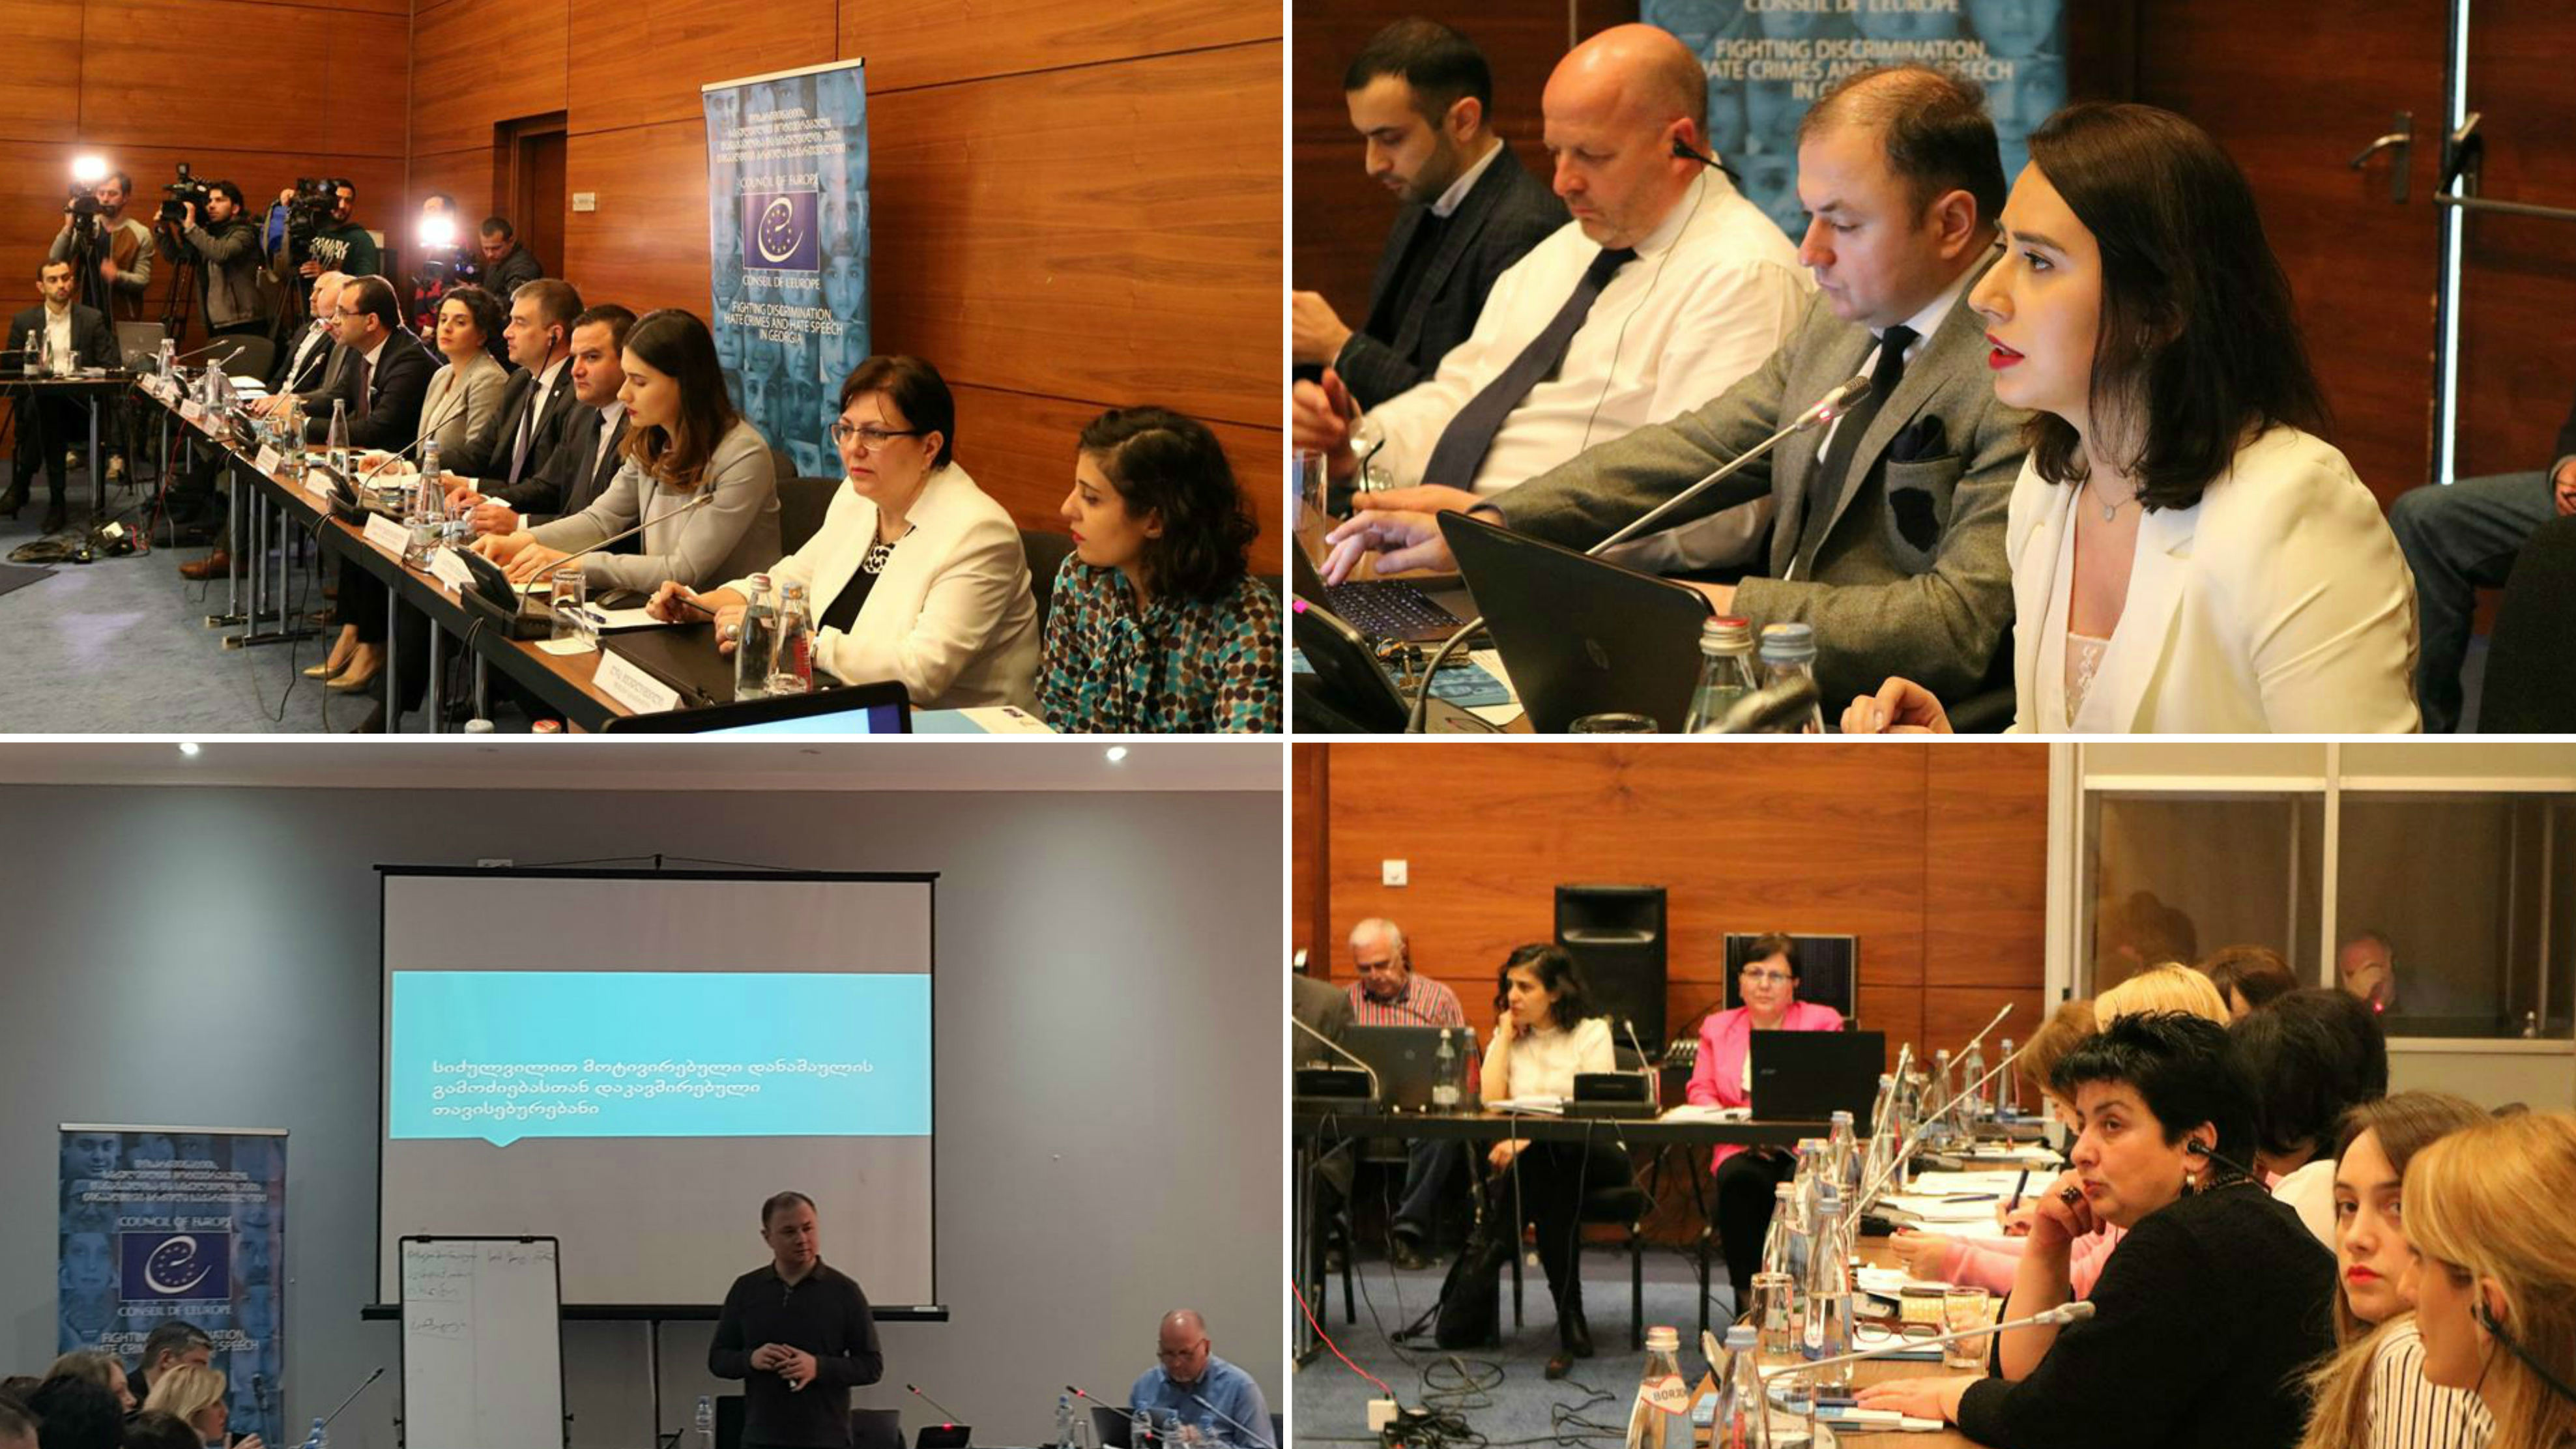 The Council of Europe Office in Georgia presented recommendations on improving data collection mechanism on discrimination and hate crimes